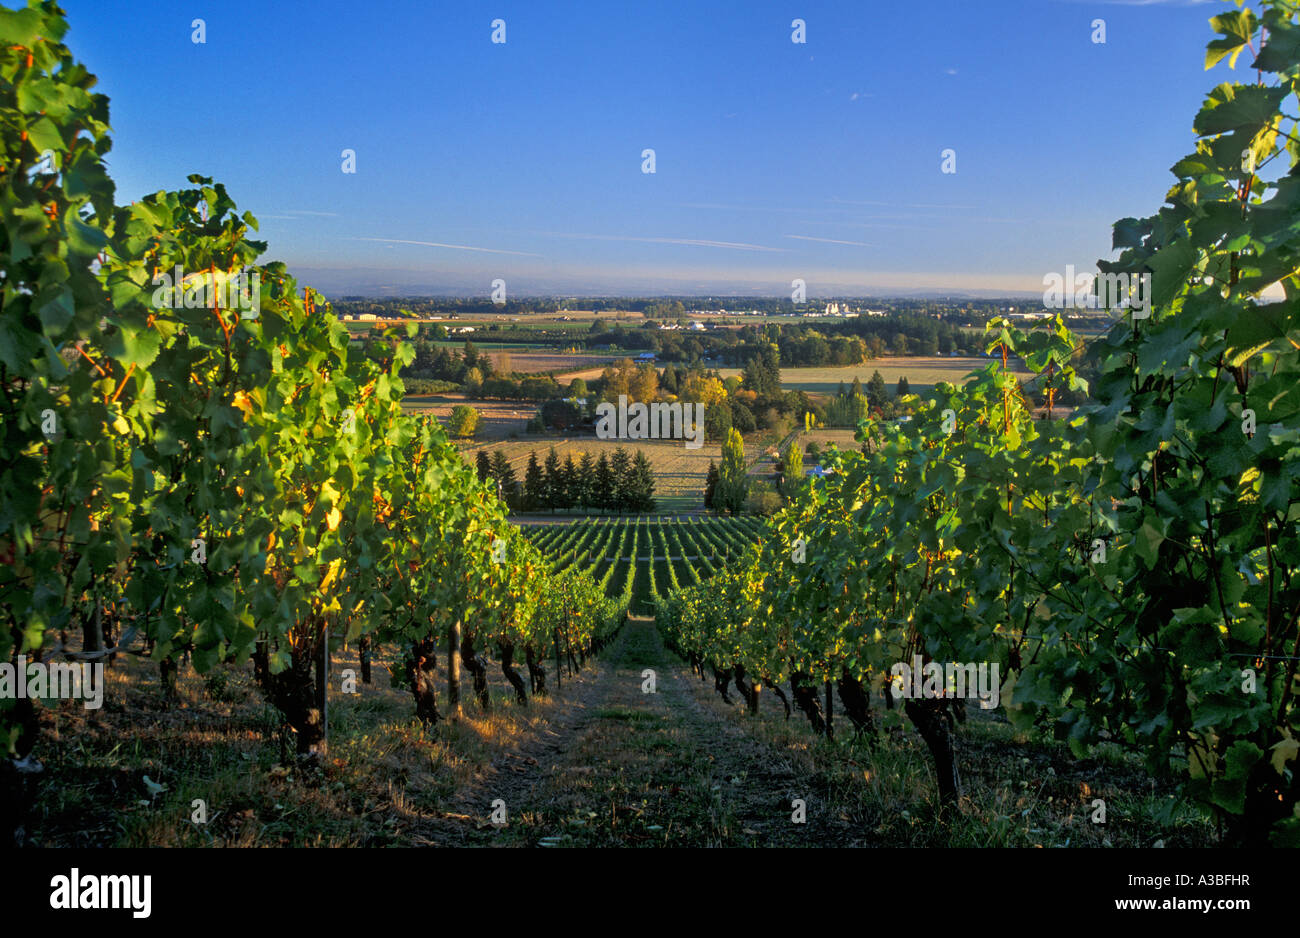 Wine grape vines and view of Willamette Valley from Champoeg Vineyards Oregon Stock Photo